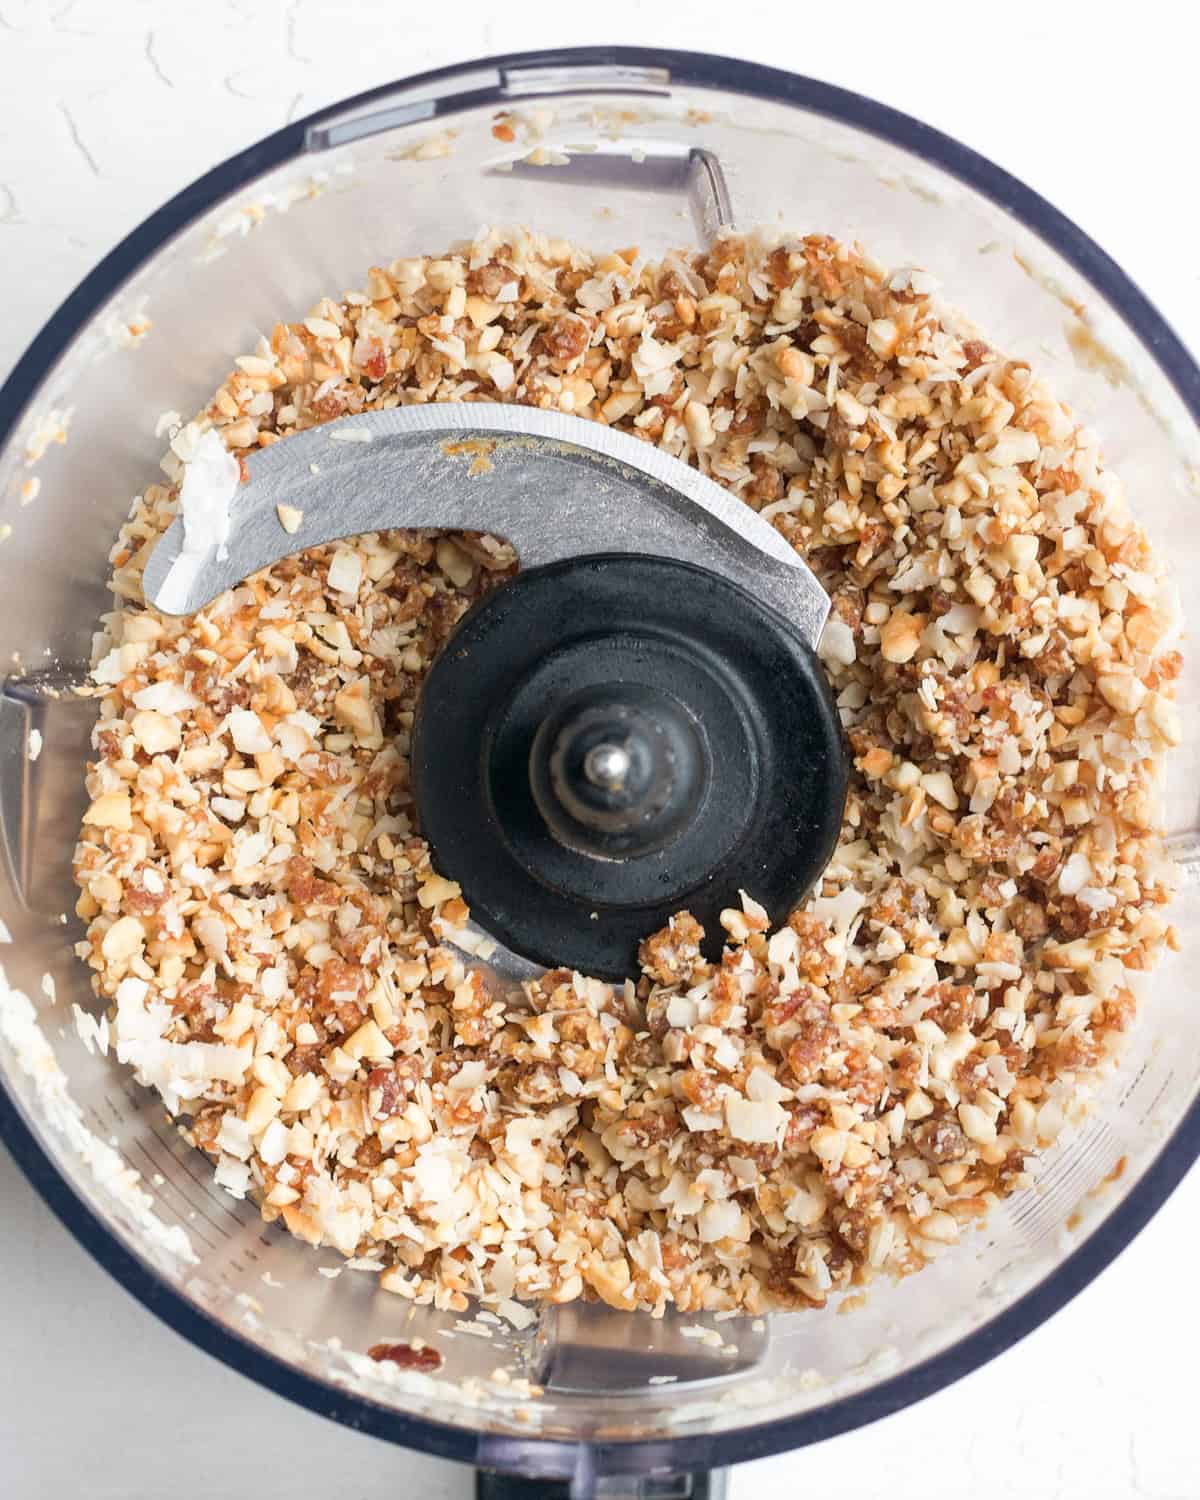 Coconut Date Balls - ingredients in the food processor after processing